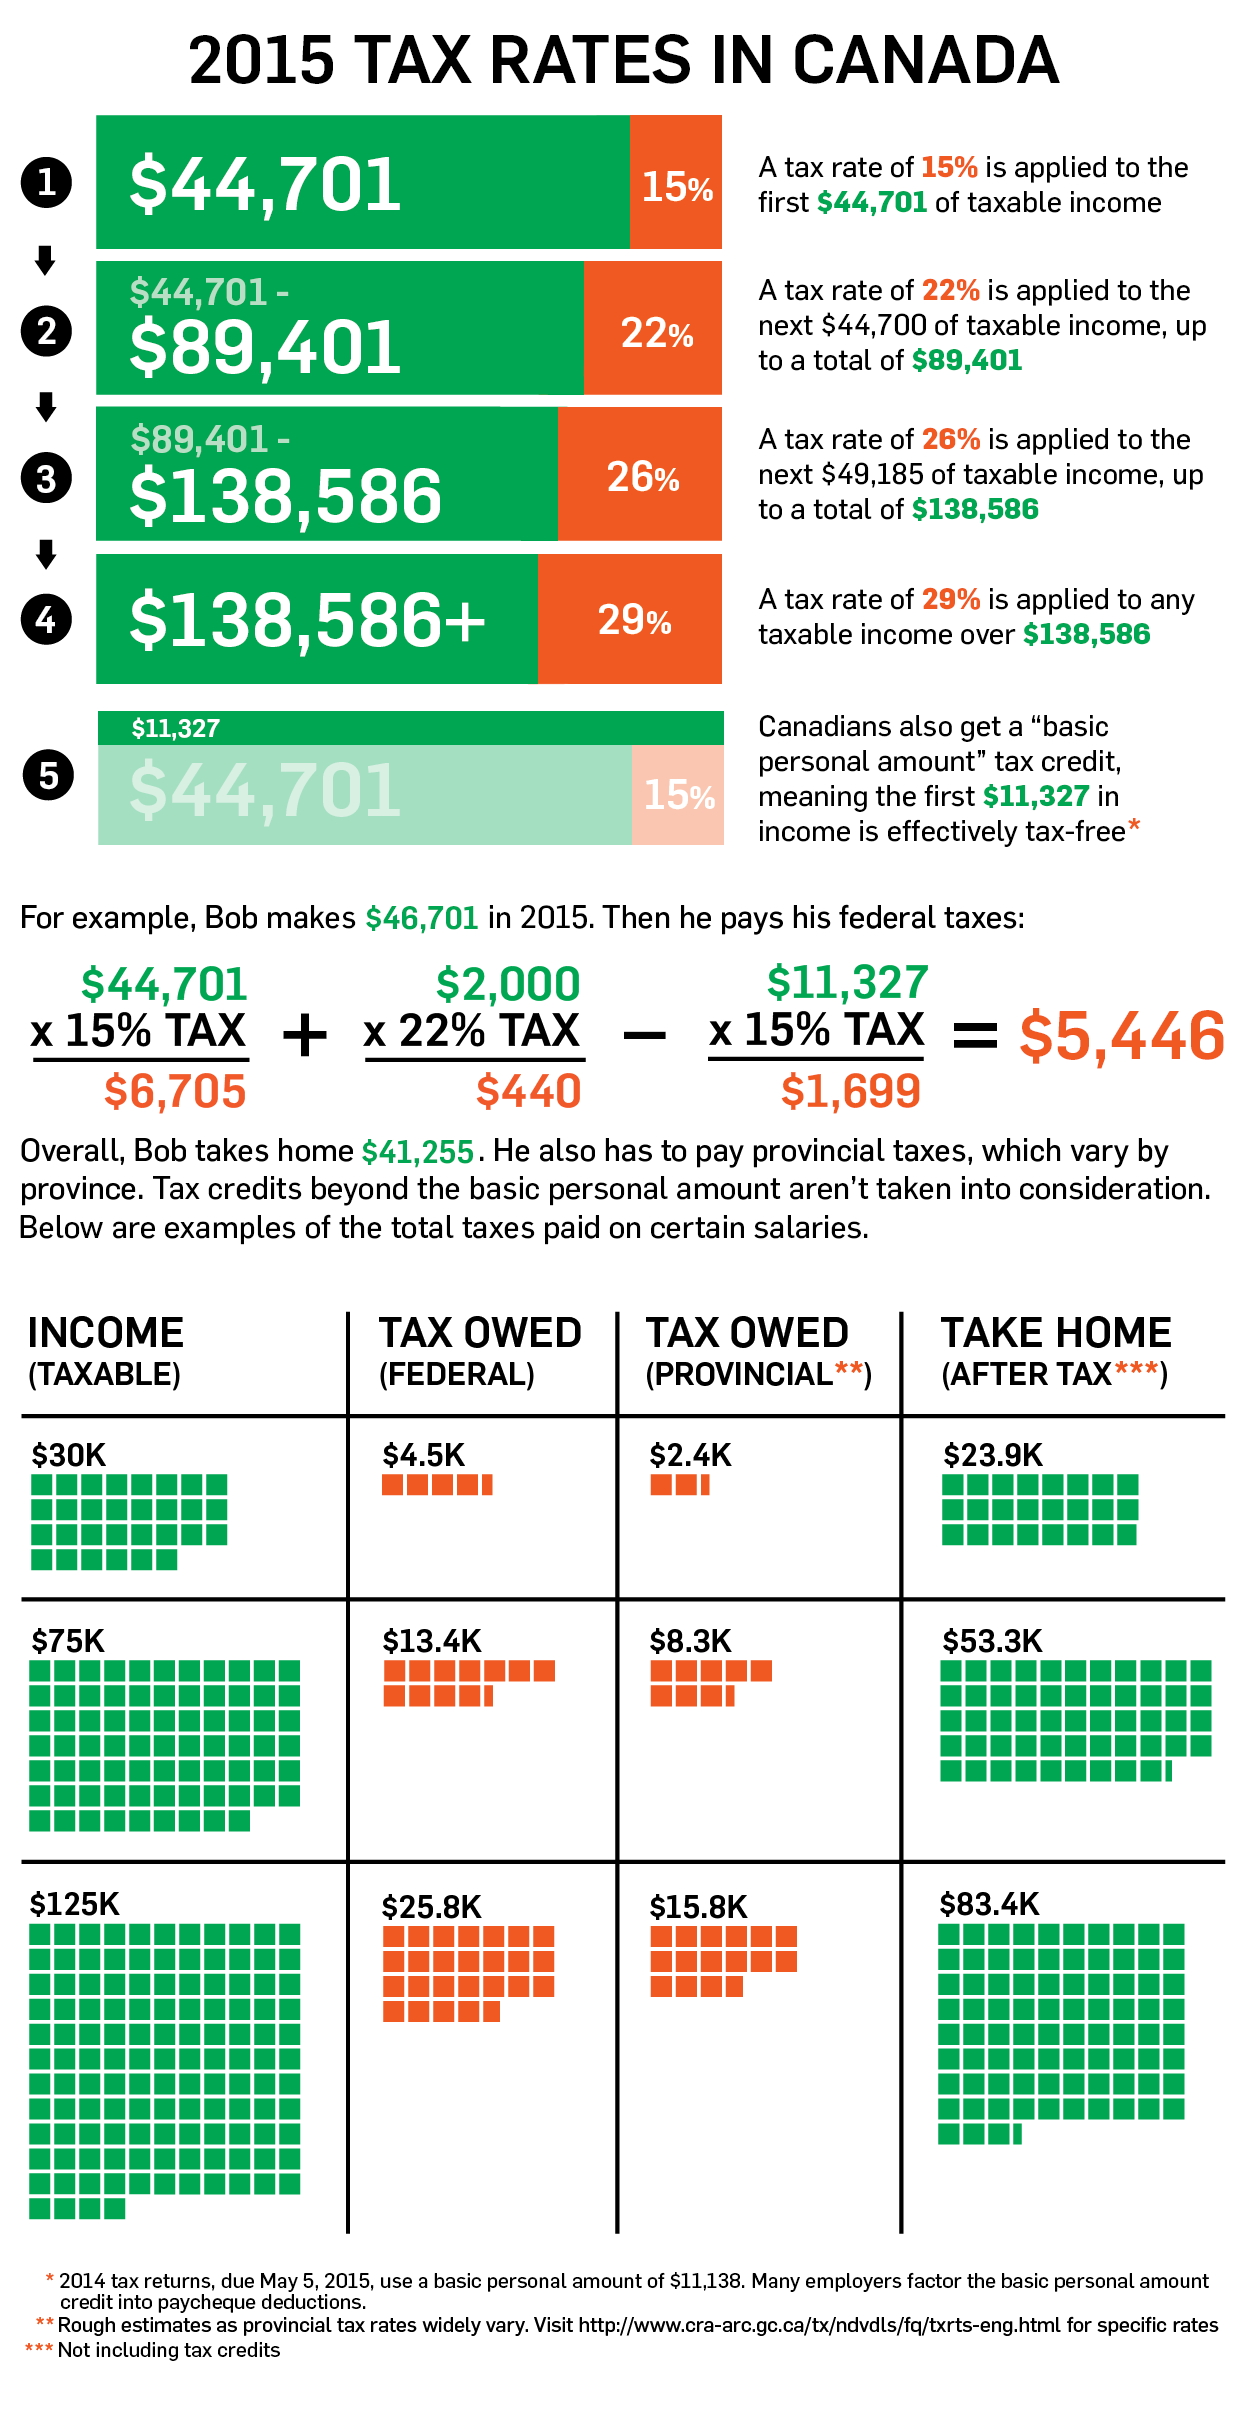 
This CTVNews.ca infographic breaks down how much in taxes you're paying based on your tax bracket.